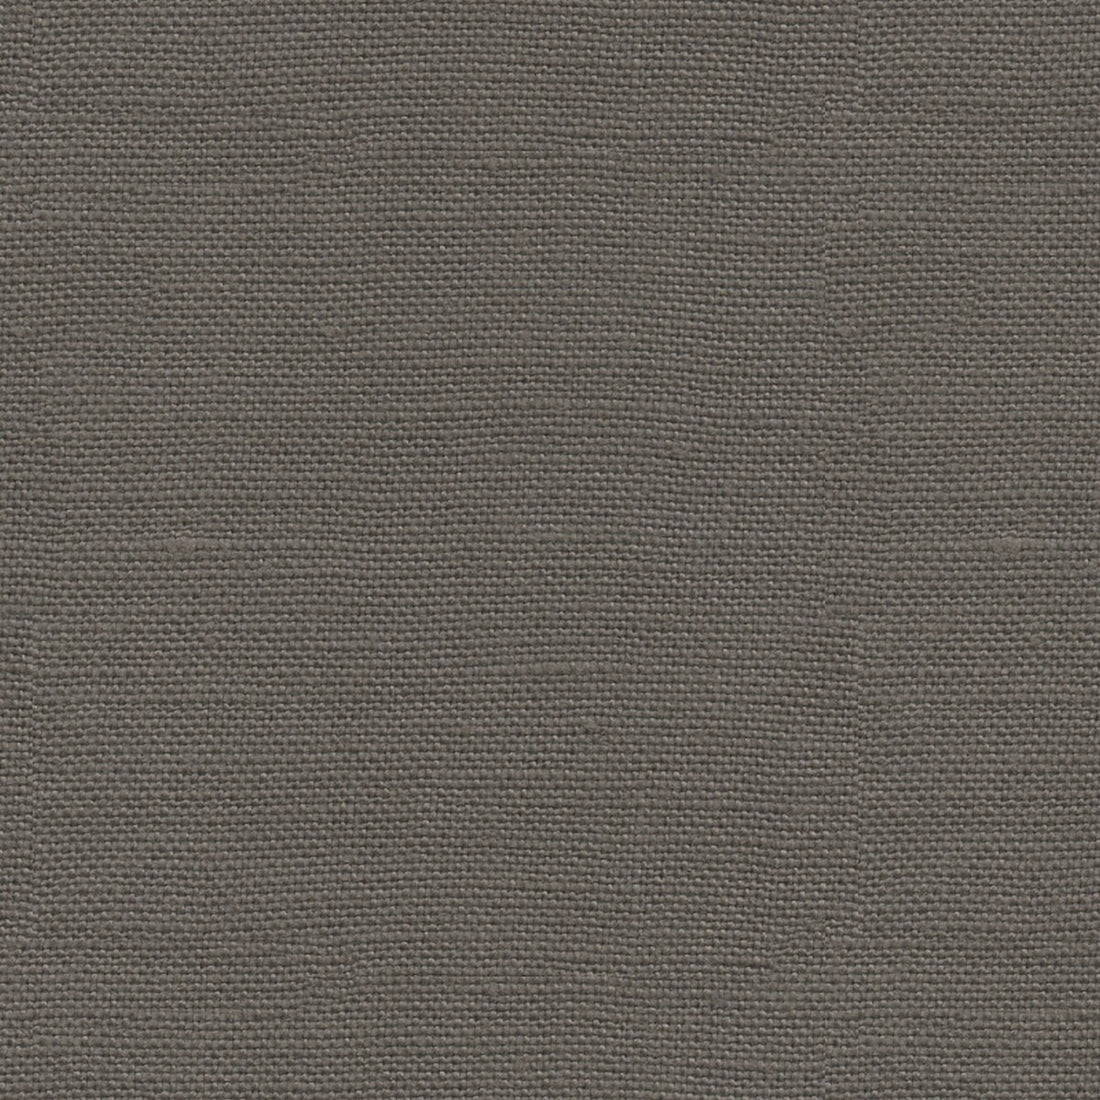 Newport fabric in graphite color - pattern ED85116.950.0 - by Threads in the Variation collection